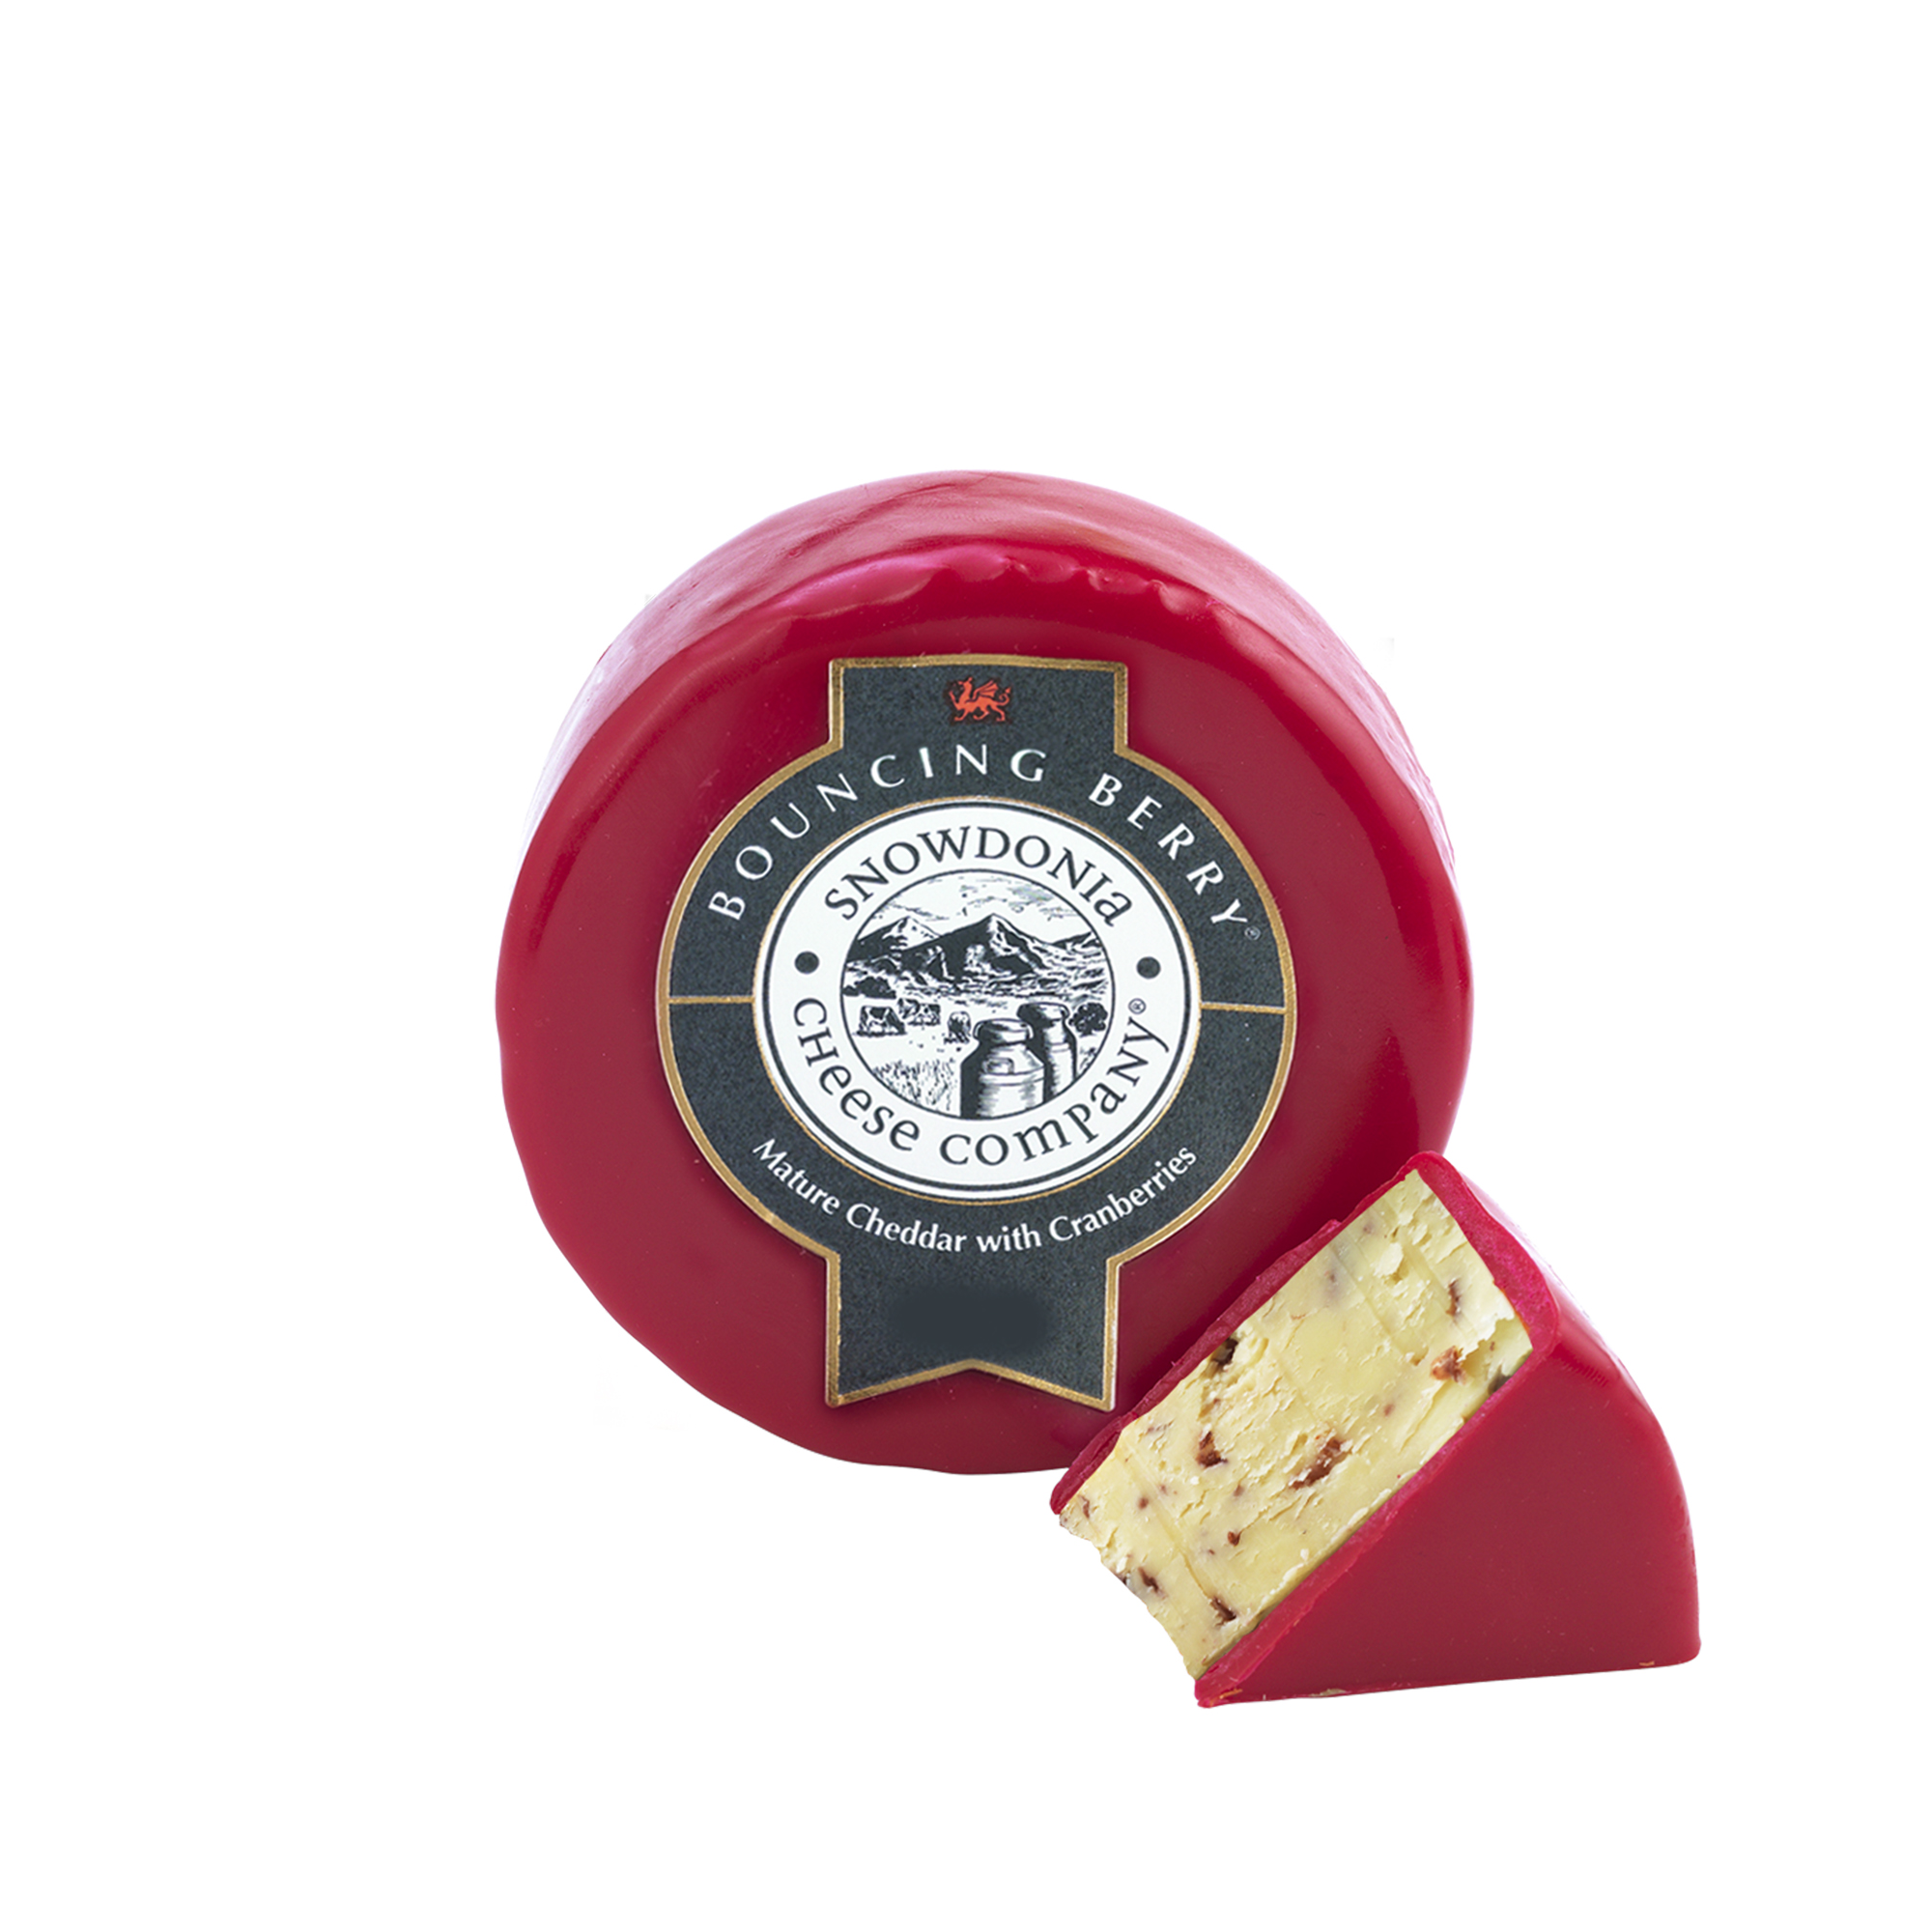 BOUNCING BERRY® Mature Cheddar with Cranberries